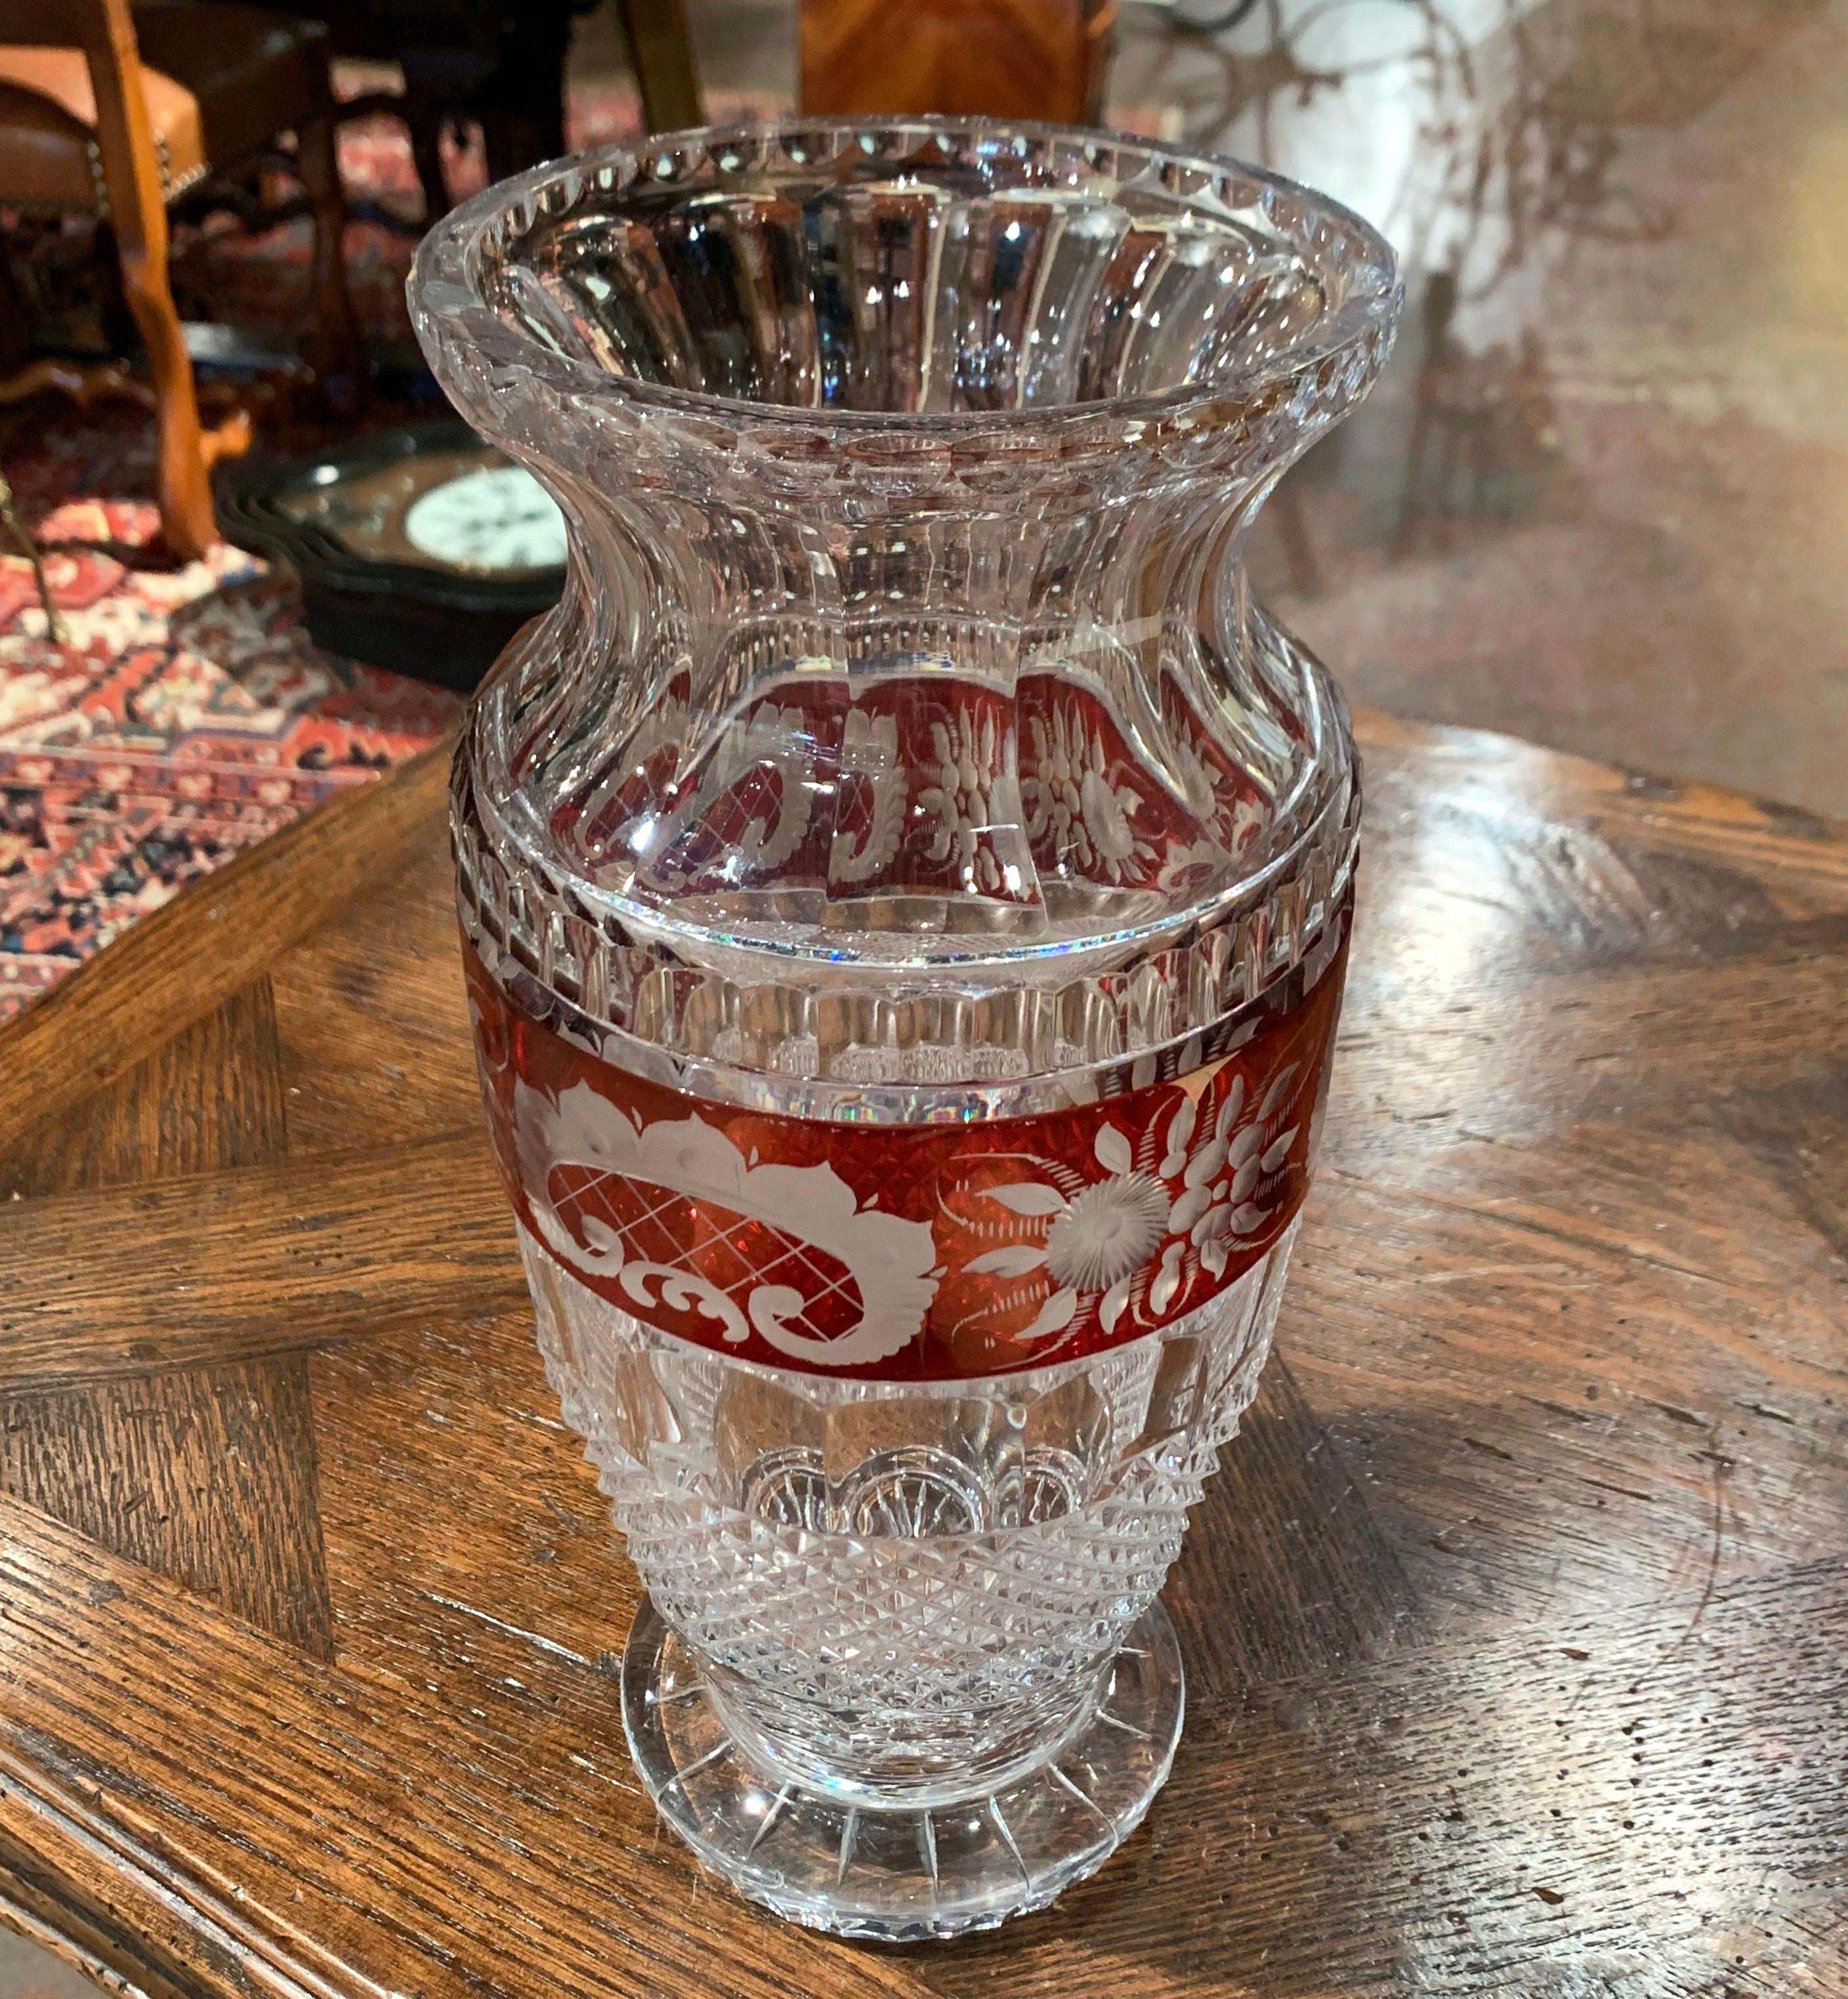 Cut Glass Midcentury French Cut-Glass Vase with Red Floral Motifs Saint Louis Style